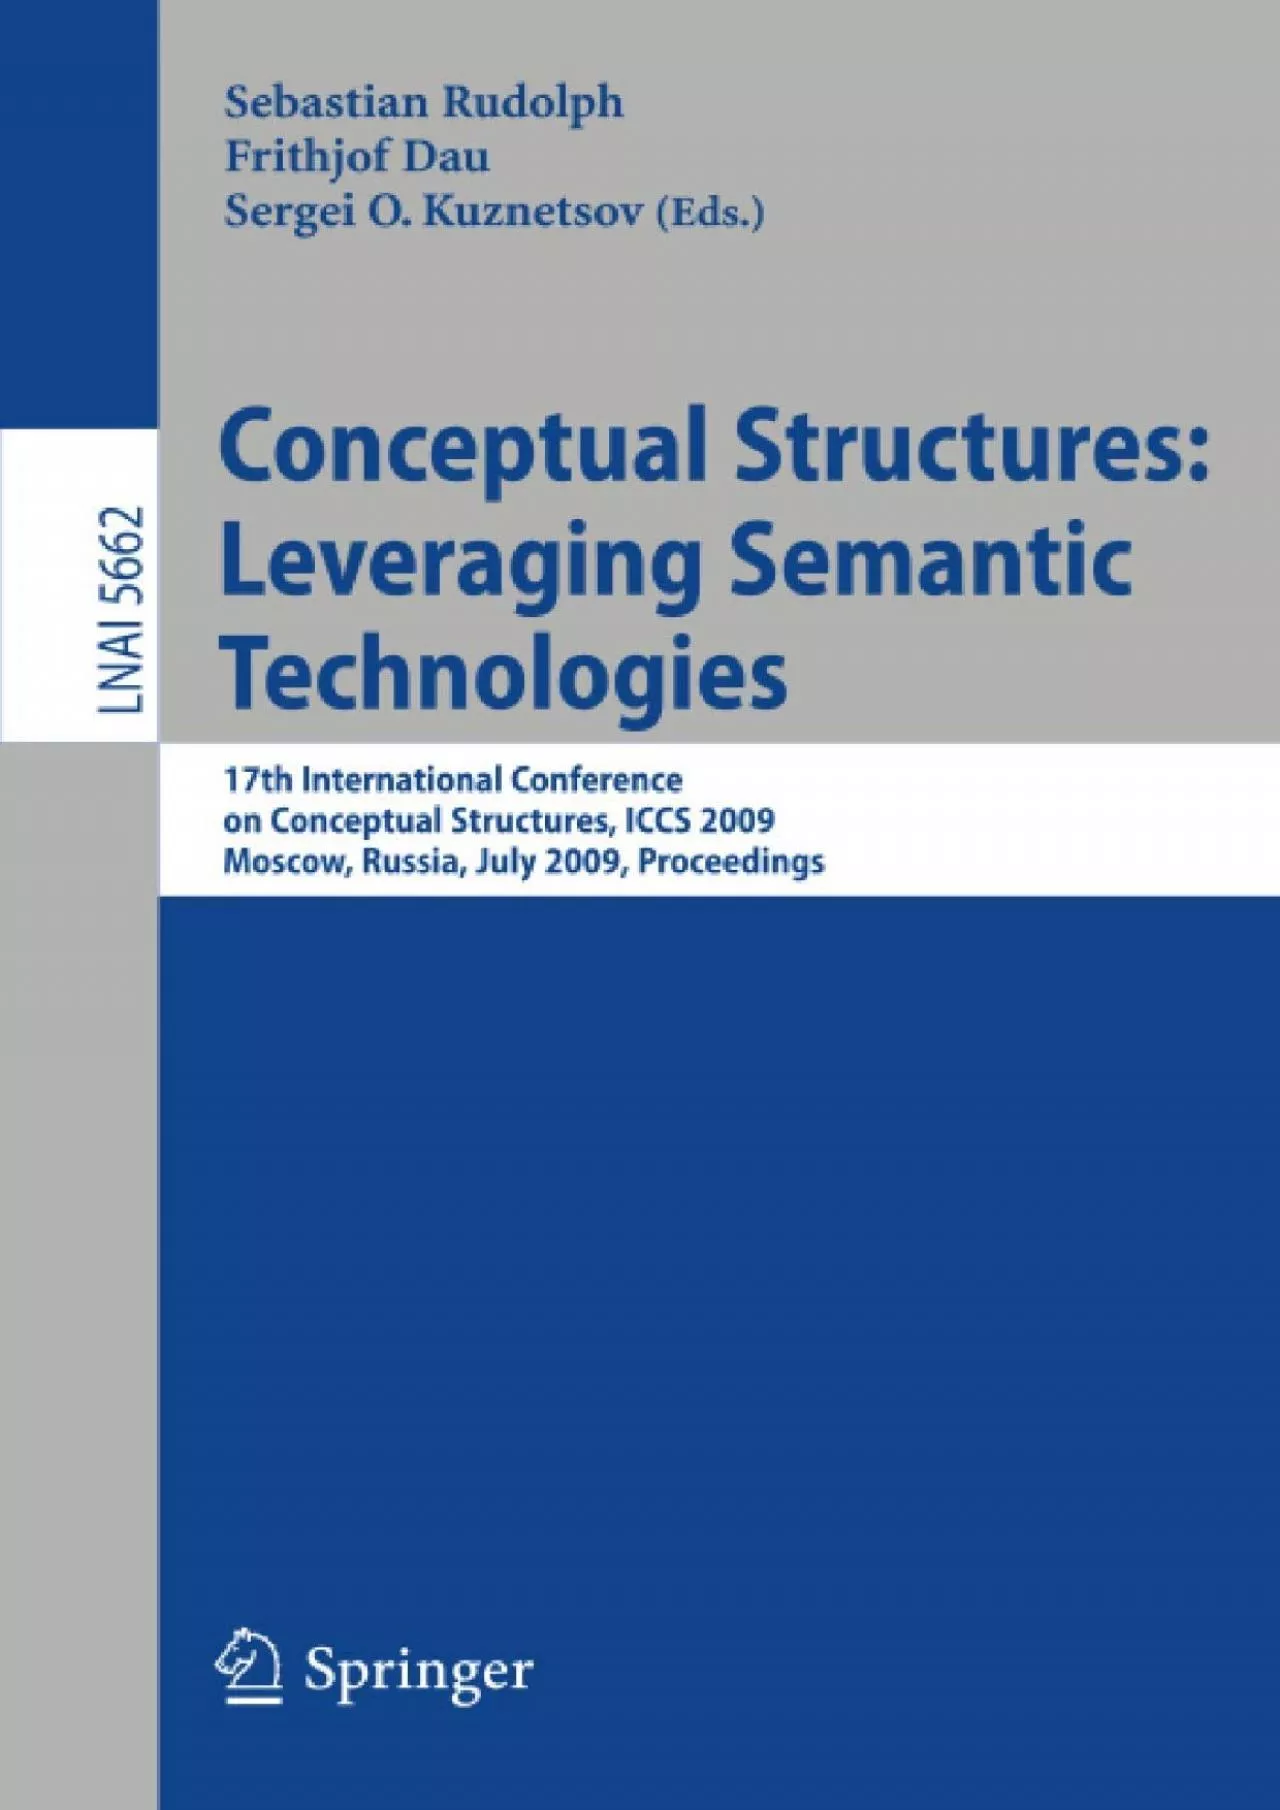 [READING BOOK]-Conceptual Structures: Leveraging Semantic Technologies: 17th International